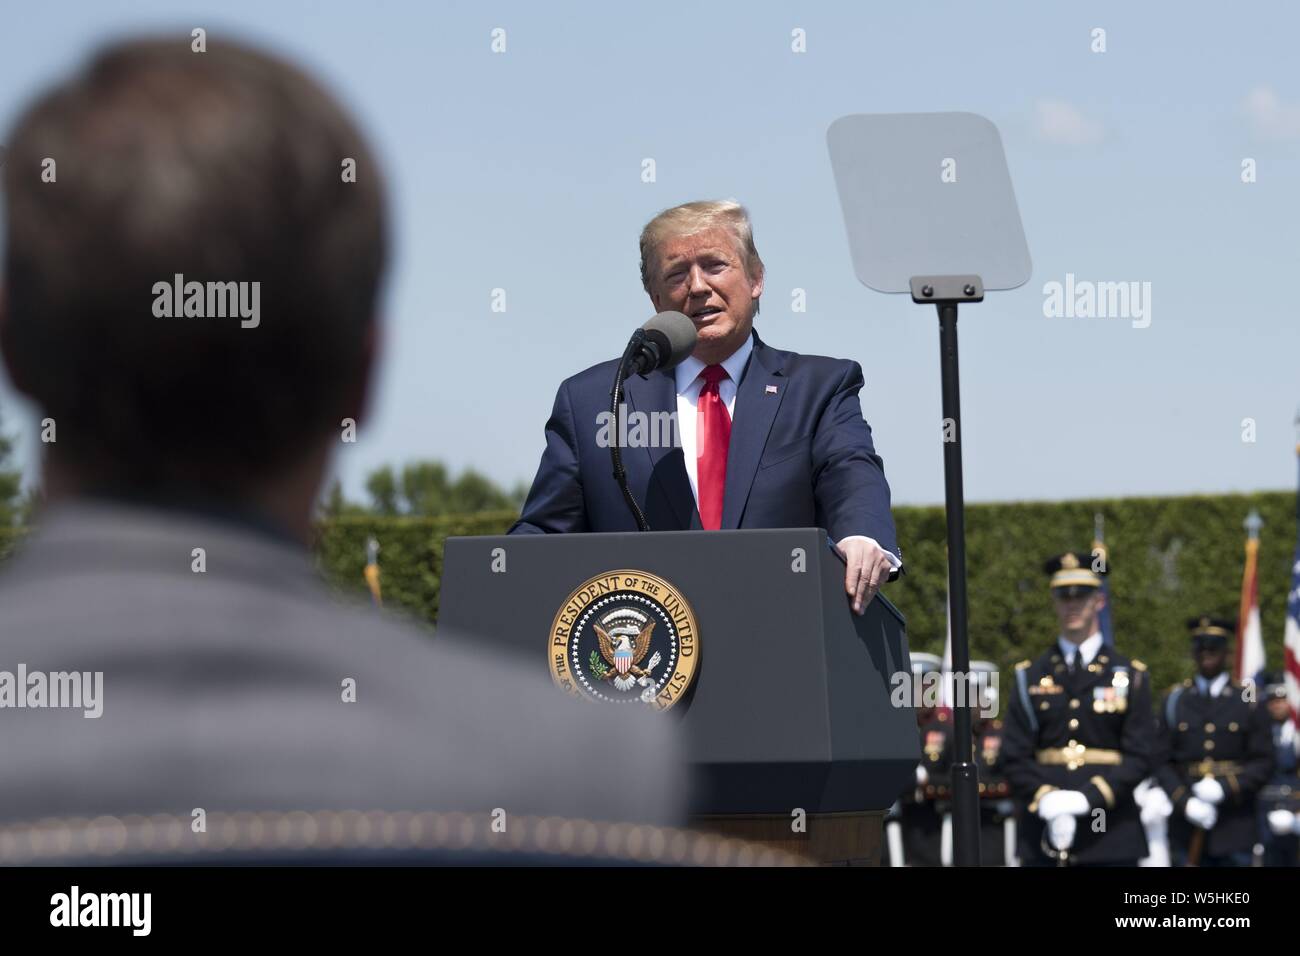 U.S. President Donald J. Trump speaks during a Full Honors Welcome Ceremony for Secretary of Defense Dr. Mark T. Esper (left), at the Pentagon, Washington, D.C. July 25, 2019, July 25, 2019. (DoD photo by Lisa Ferdinando). () Stock Photo